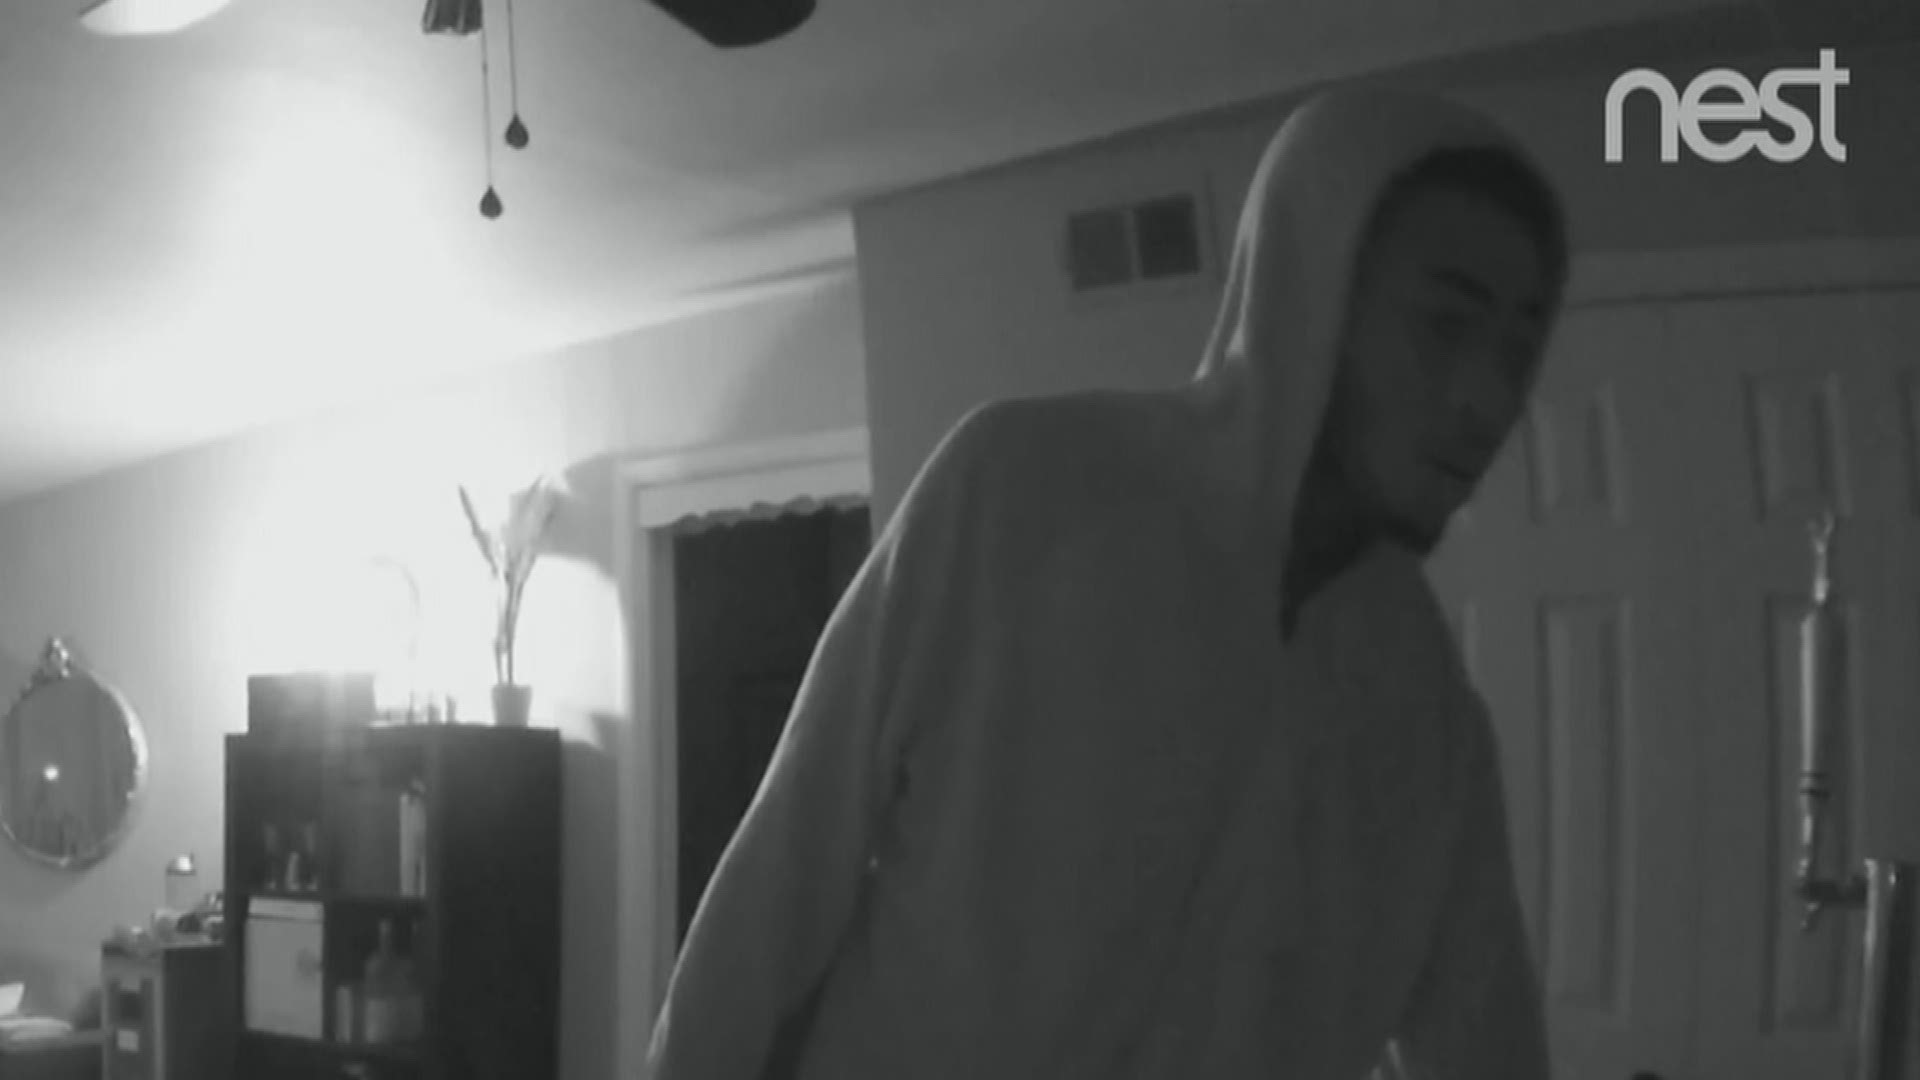 Burglar caught on camera after home surveillance recorded everything